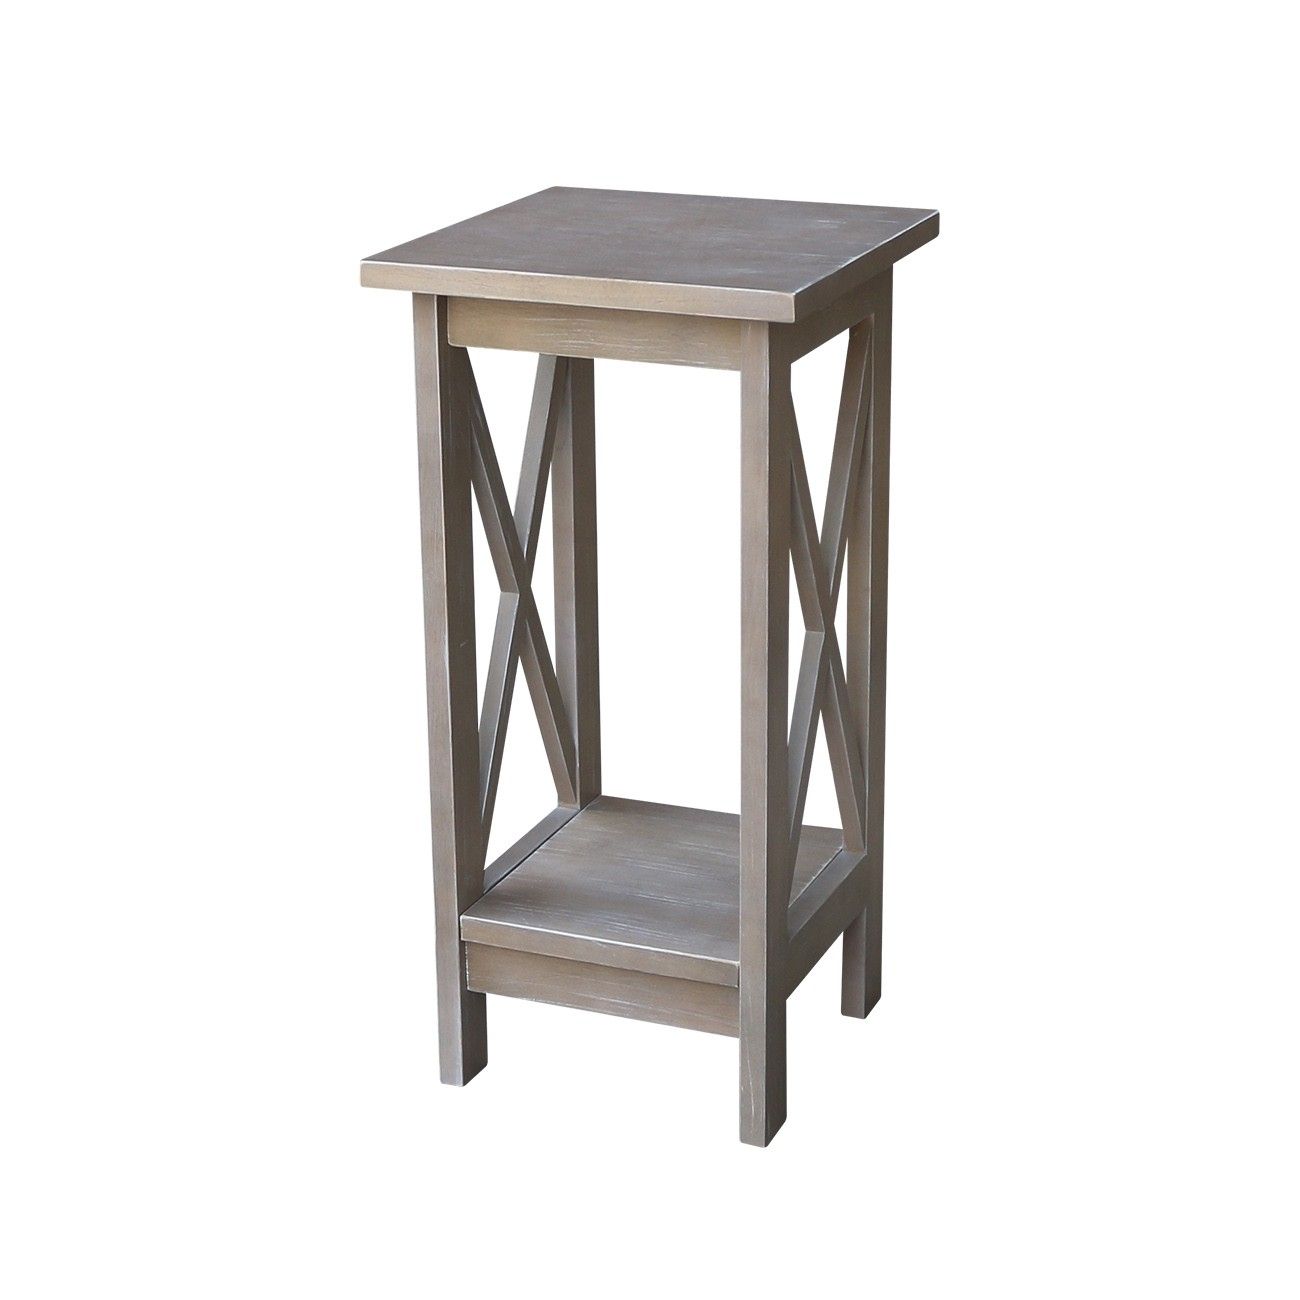 24" X Sided Plant Stand  Weathered Gray (3 Sizes Available) Pertaining To Weathered Gray Plant Stands (View 3 of 15)